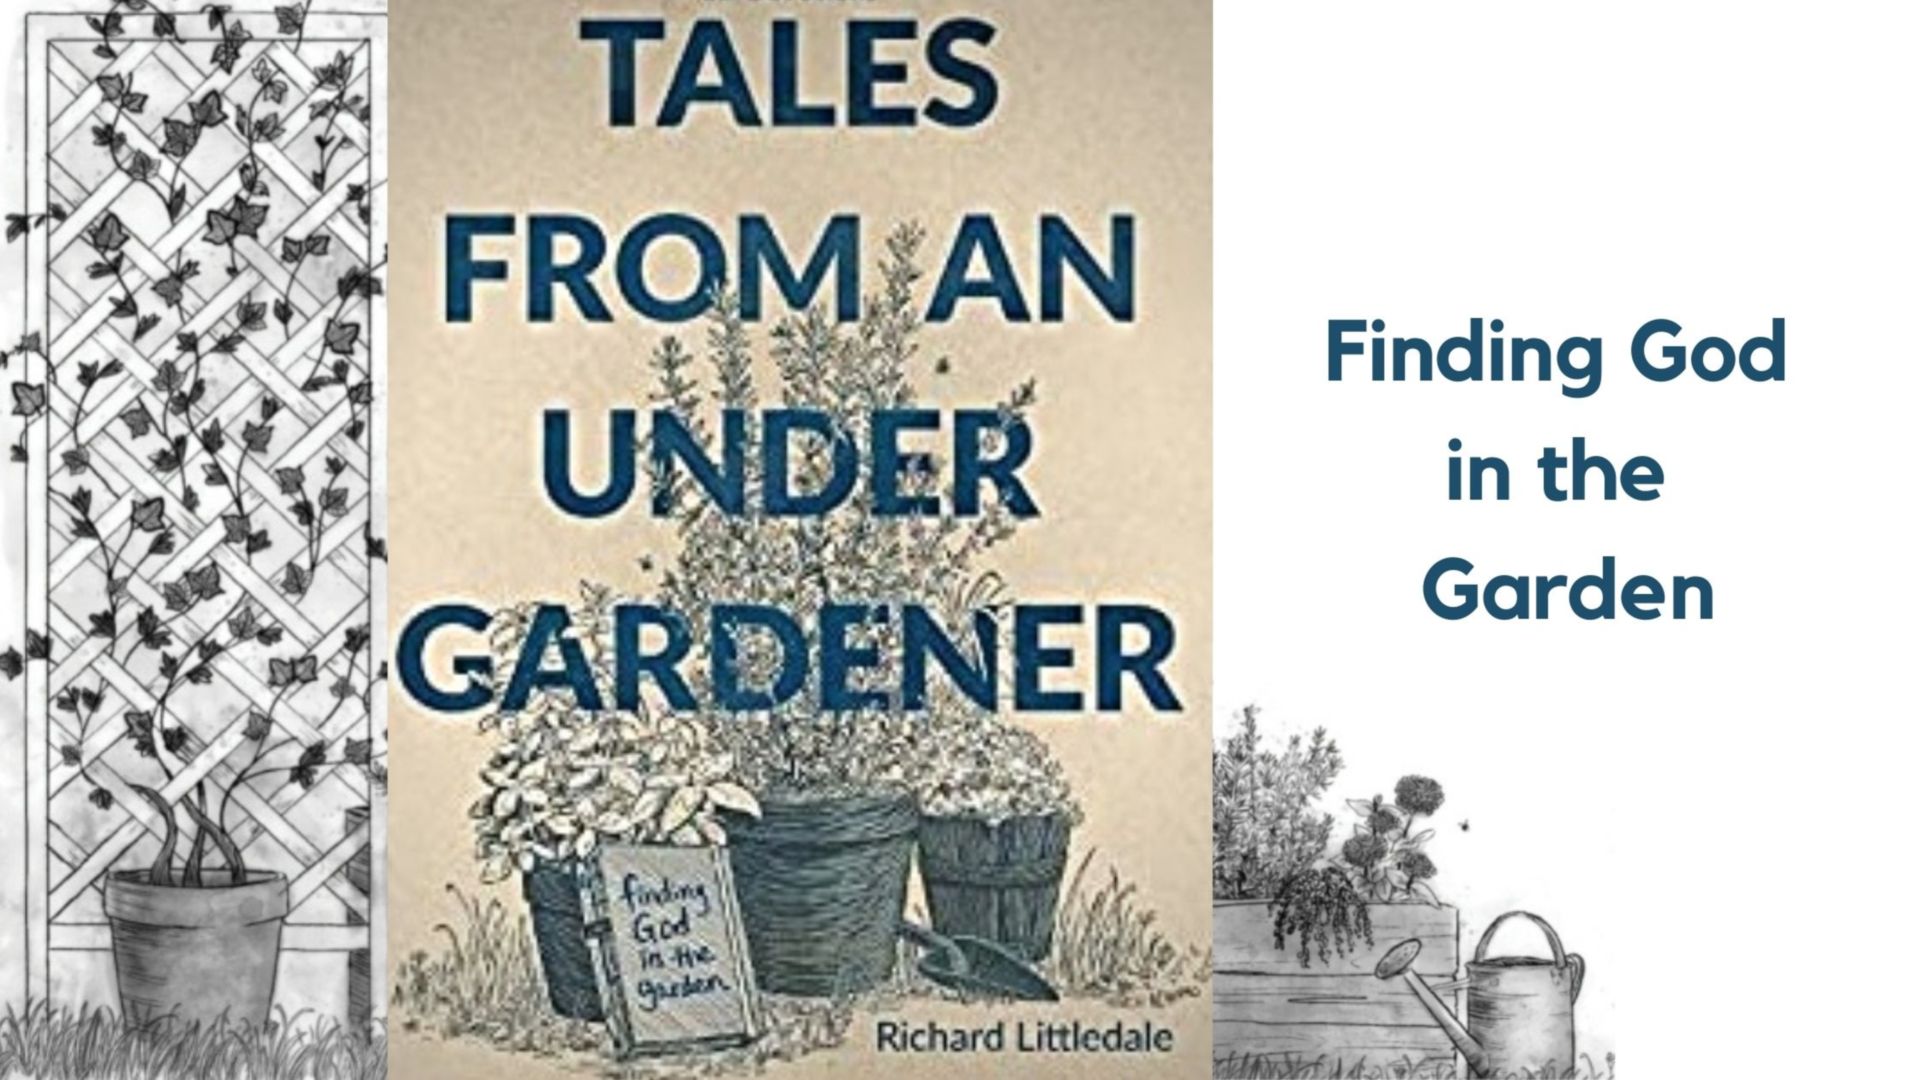 Interview with Richard Littledale, author of 'Tales from an Under Gardener'